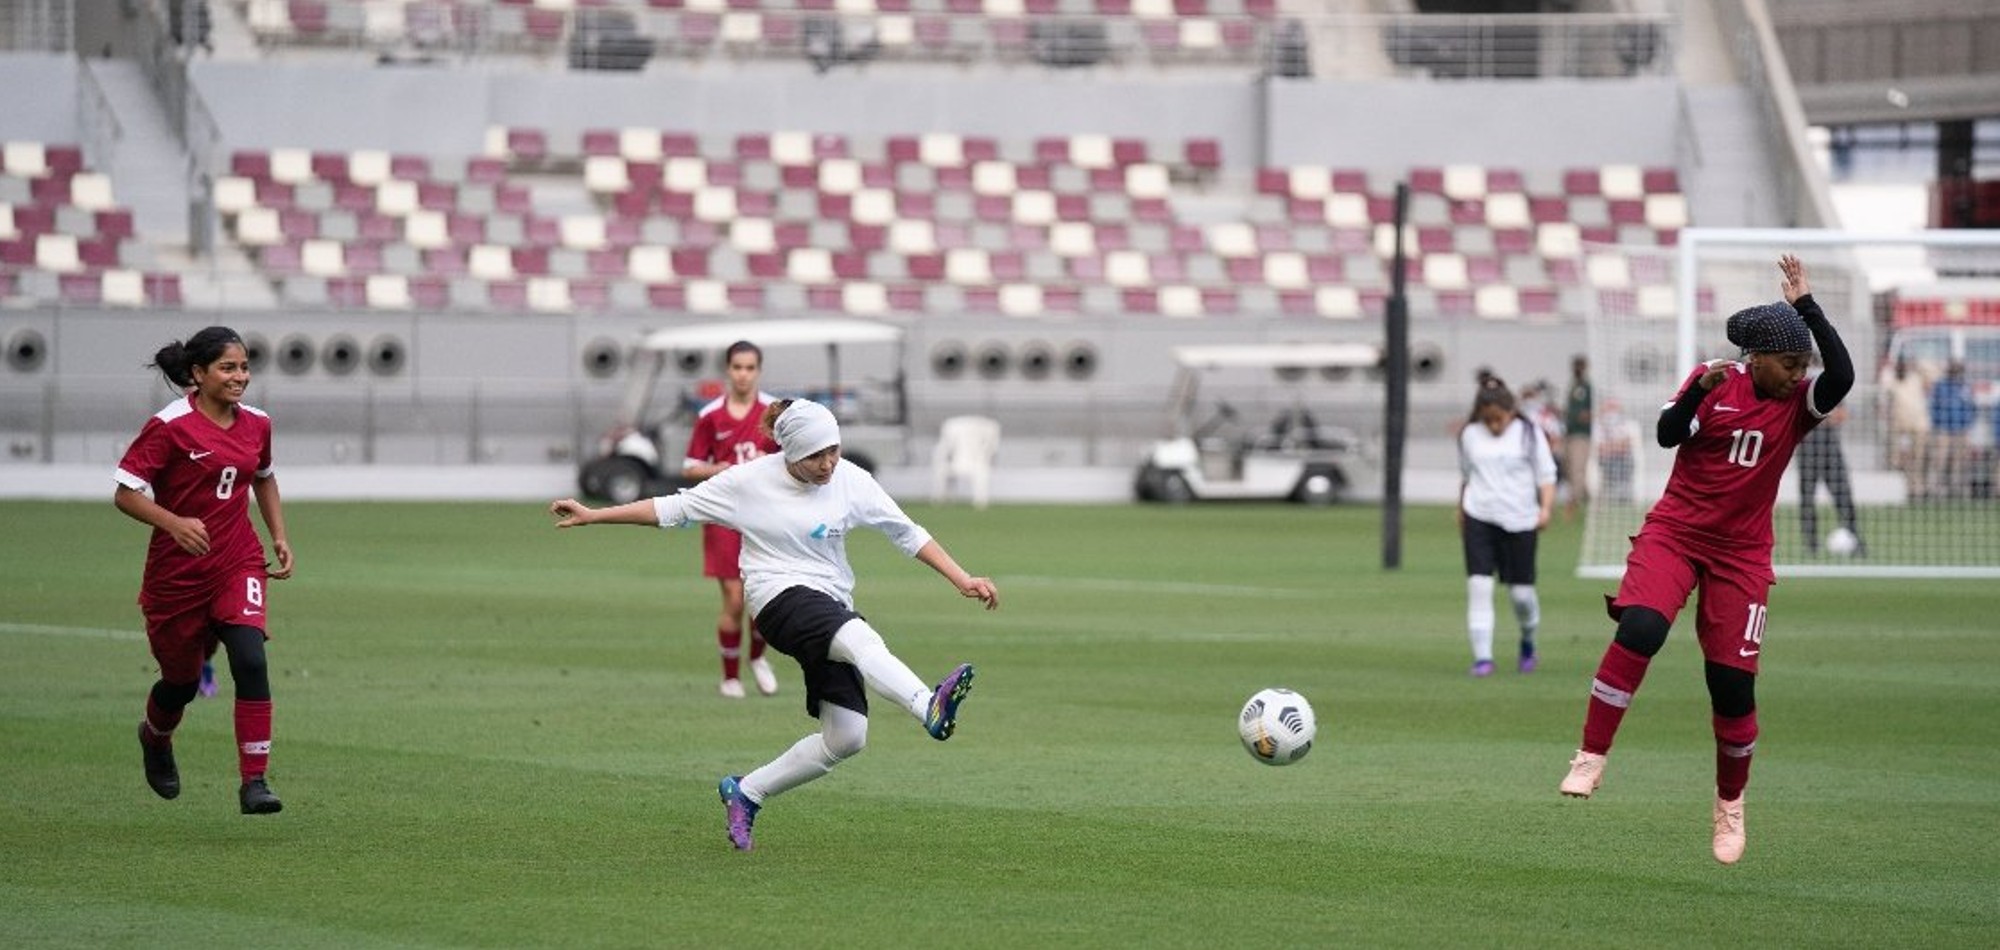 Qatar organises friendly match for Afghanistan national women’s team at FIFA World Cup™ stadium